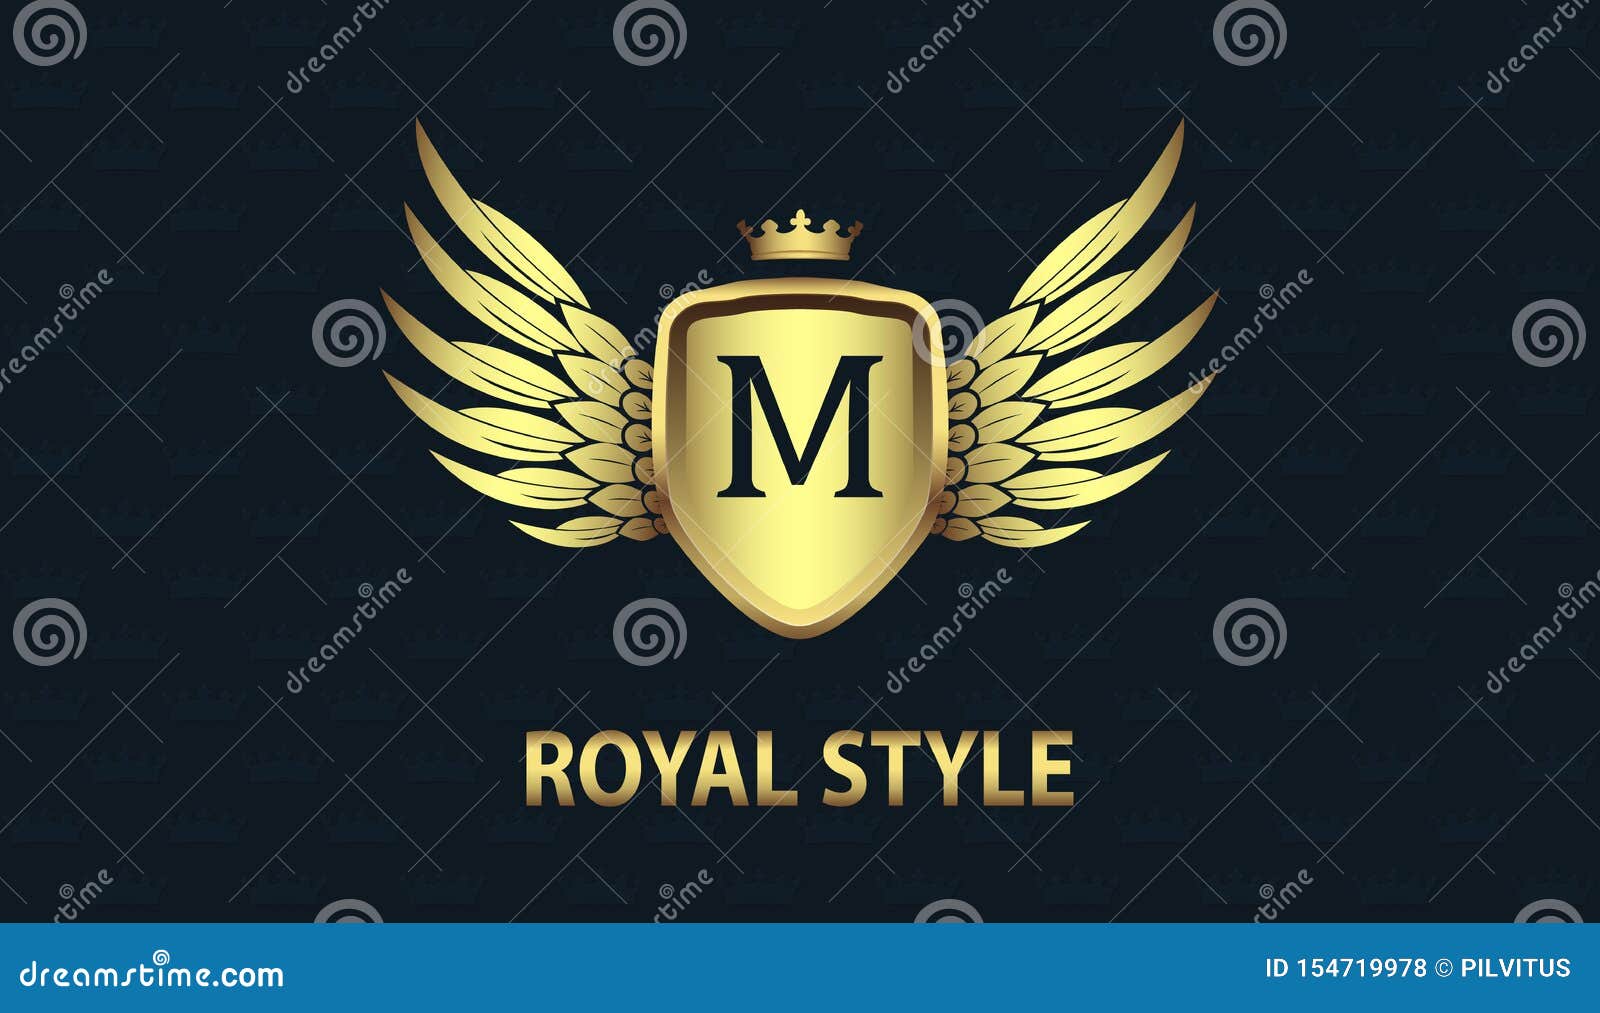 Stylish Gold Shield with Wings, Crown and Initial Letter M Isolated ...